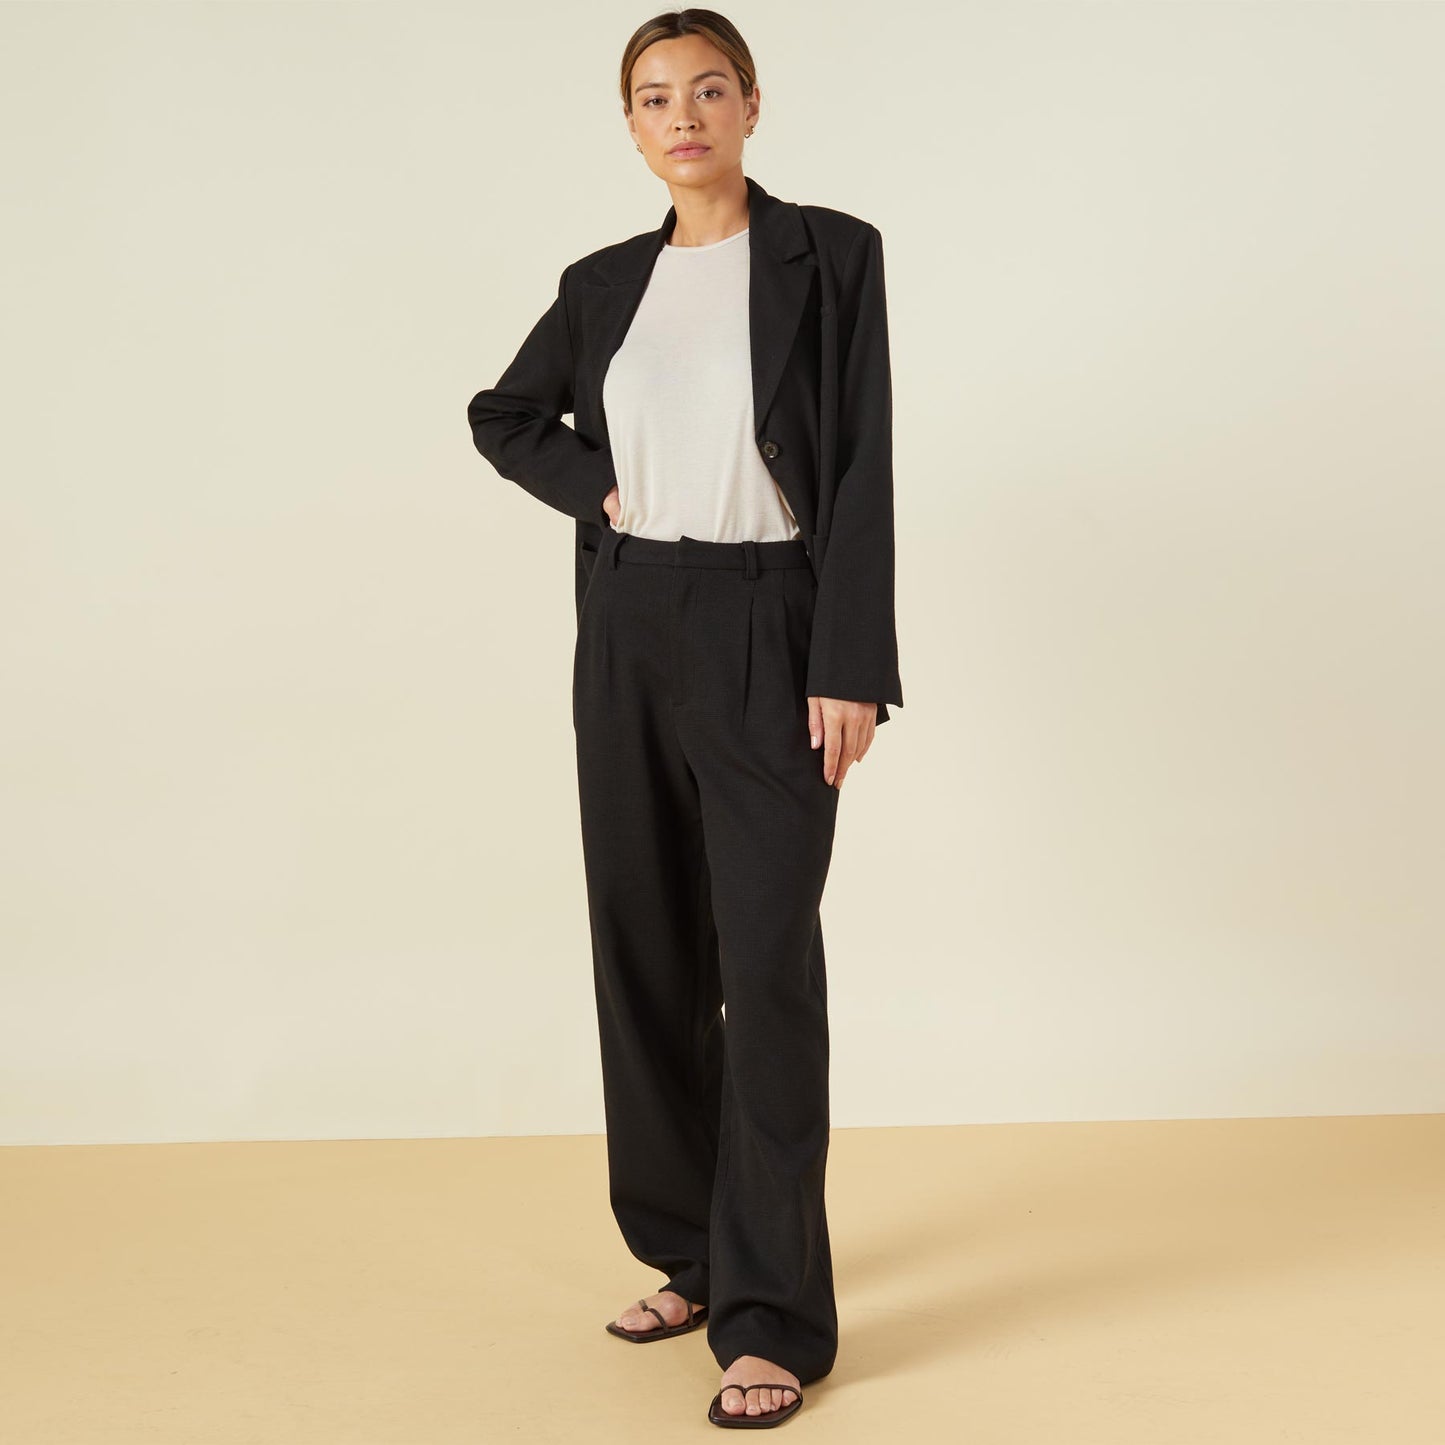 Front view of model wearing the bonded thermal pleated pants in black.